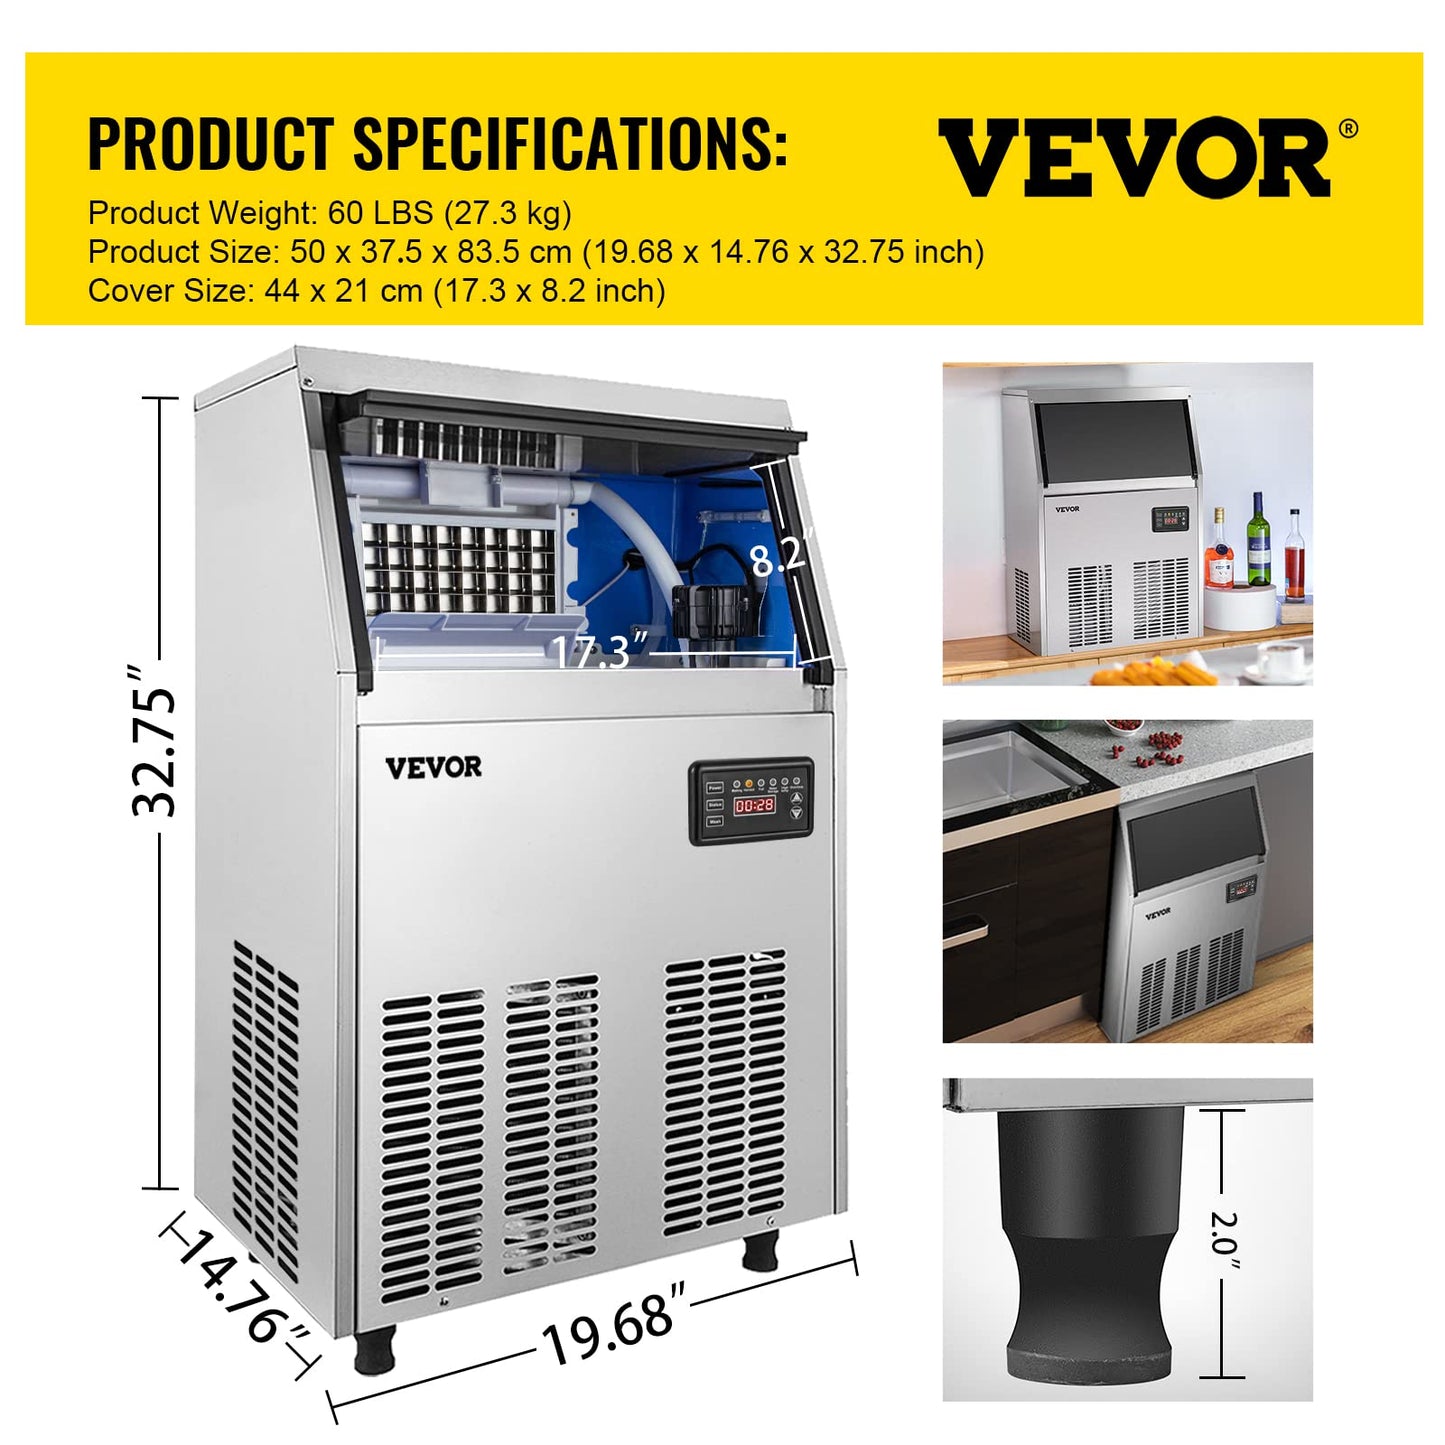 VEVOR Commercial Ice Maker Machine, 110-120LBS/24H with 33LBS Bin Stainless Steel Automatic Operation Commercial Ice Machine for Home Bar